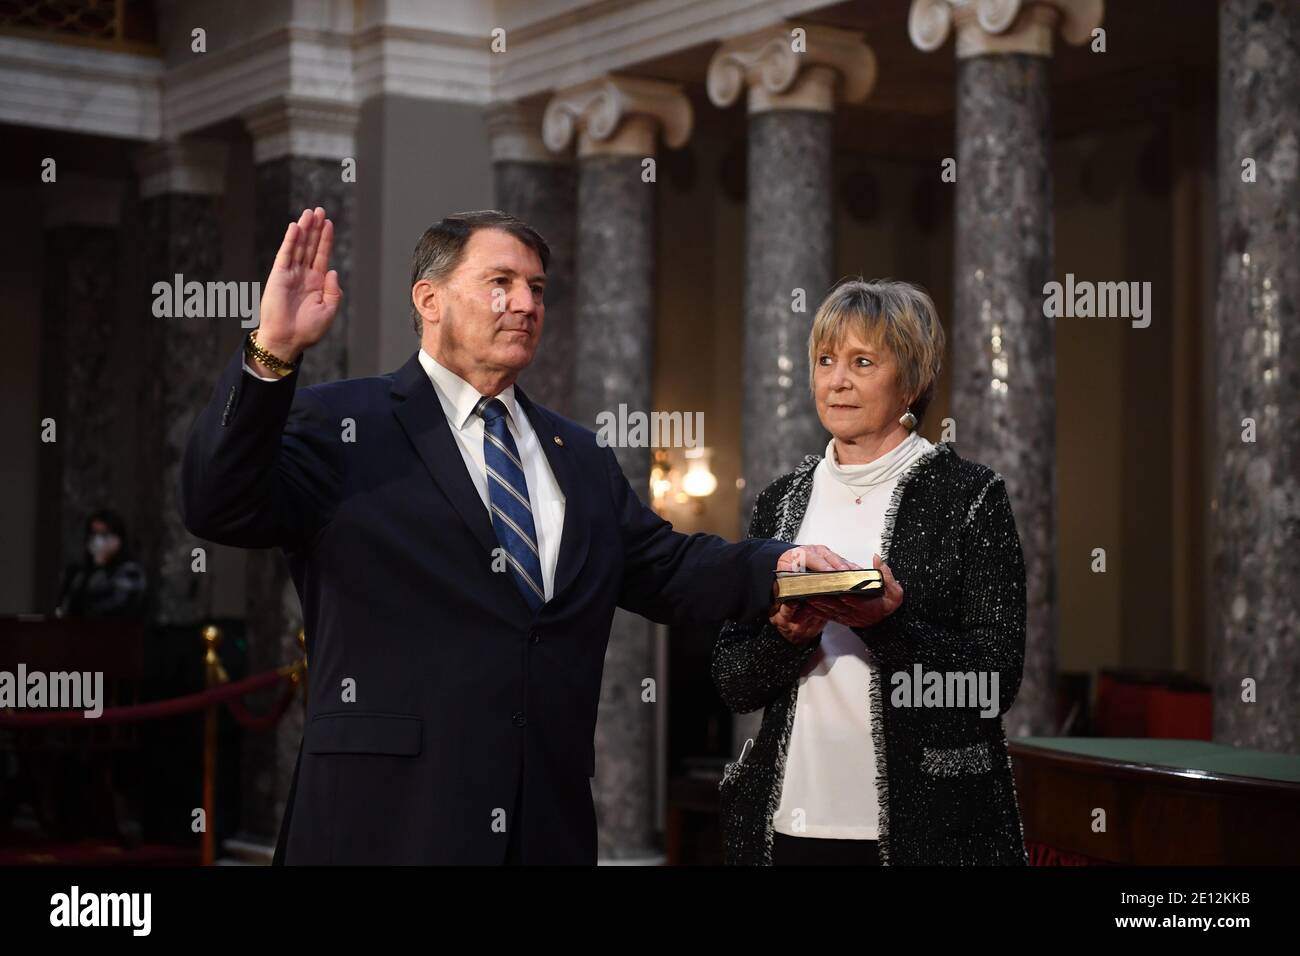 United States Senator Mike Rounds (Republican of South Dakota), participates in a mock swearing-in for the 117th Congress with Vice President Mike Pence, as his wife Jean Rounds holds a bible, in the Old Senate Chambers at the U.S. Capitol Building in Washington, DC on Sunday, January 3, 2021. Credit: Kevin Dietsch/Pool via CNP/MediaPunch Stock Photo